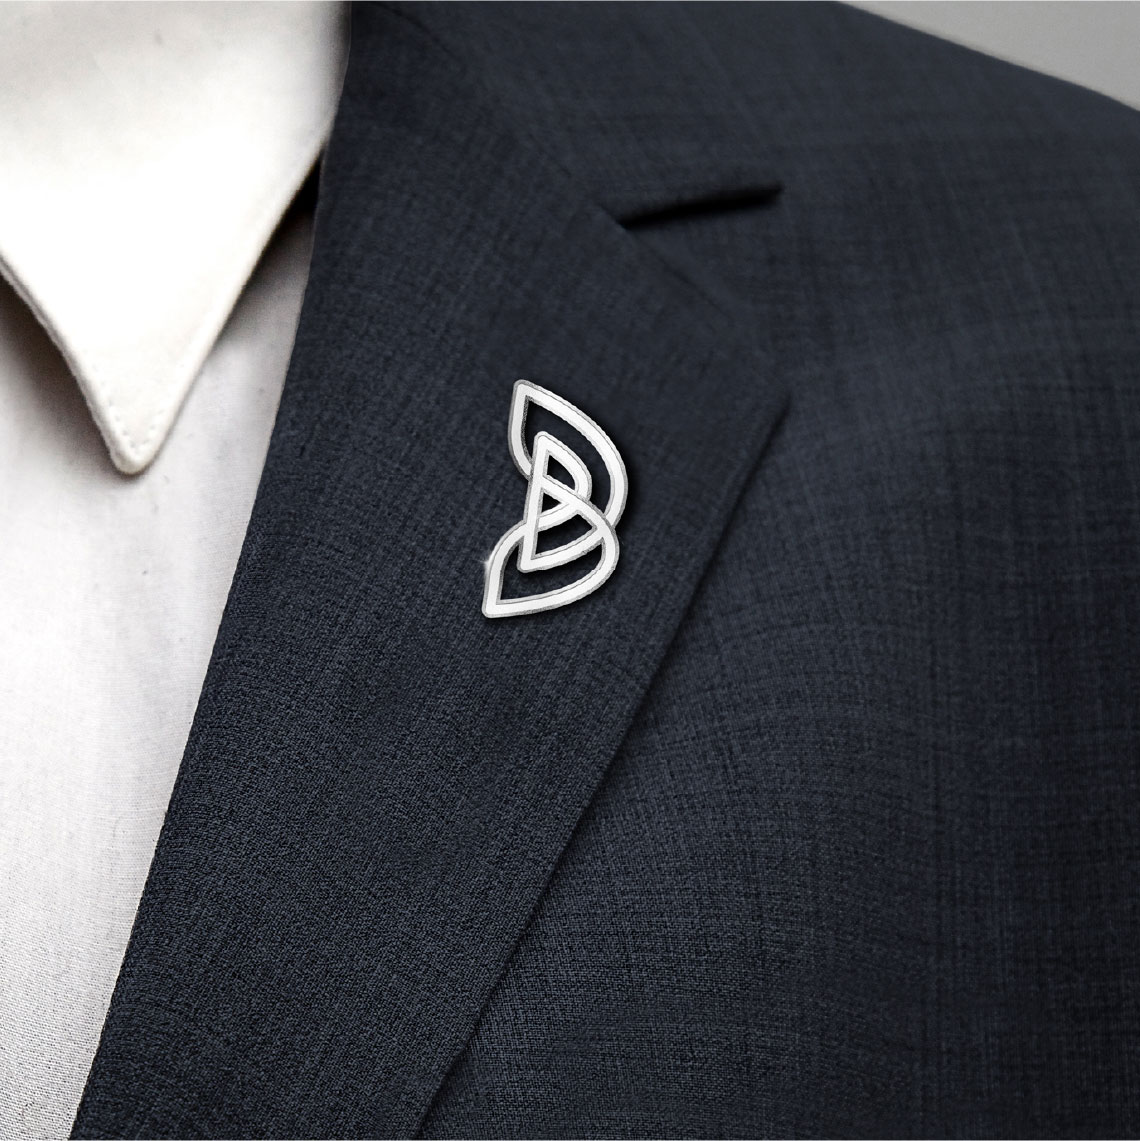 Beeah symbol applied as a pin on a suit lapel